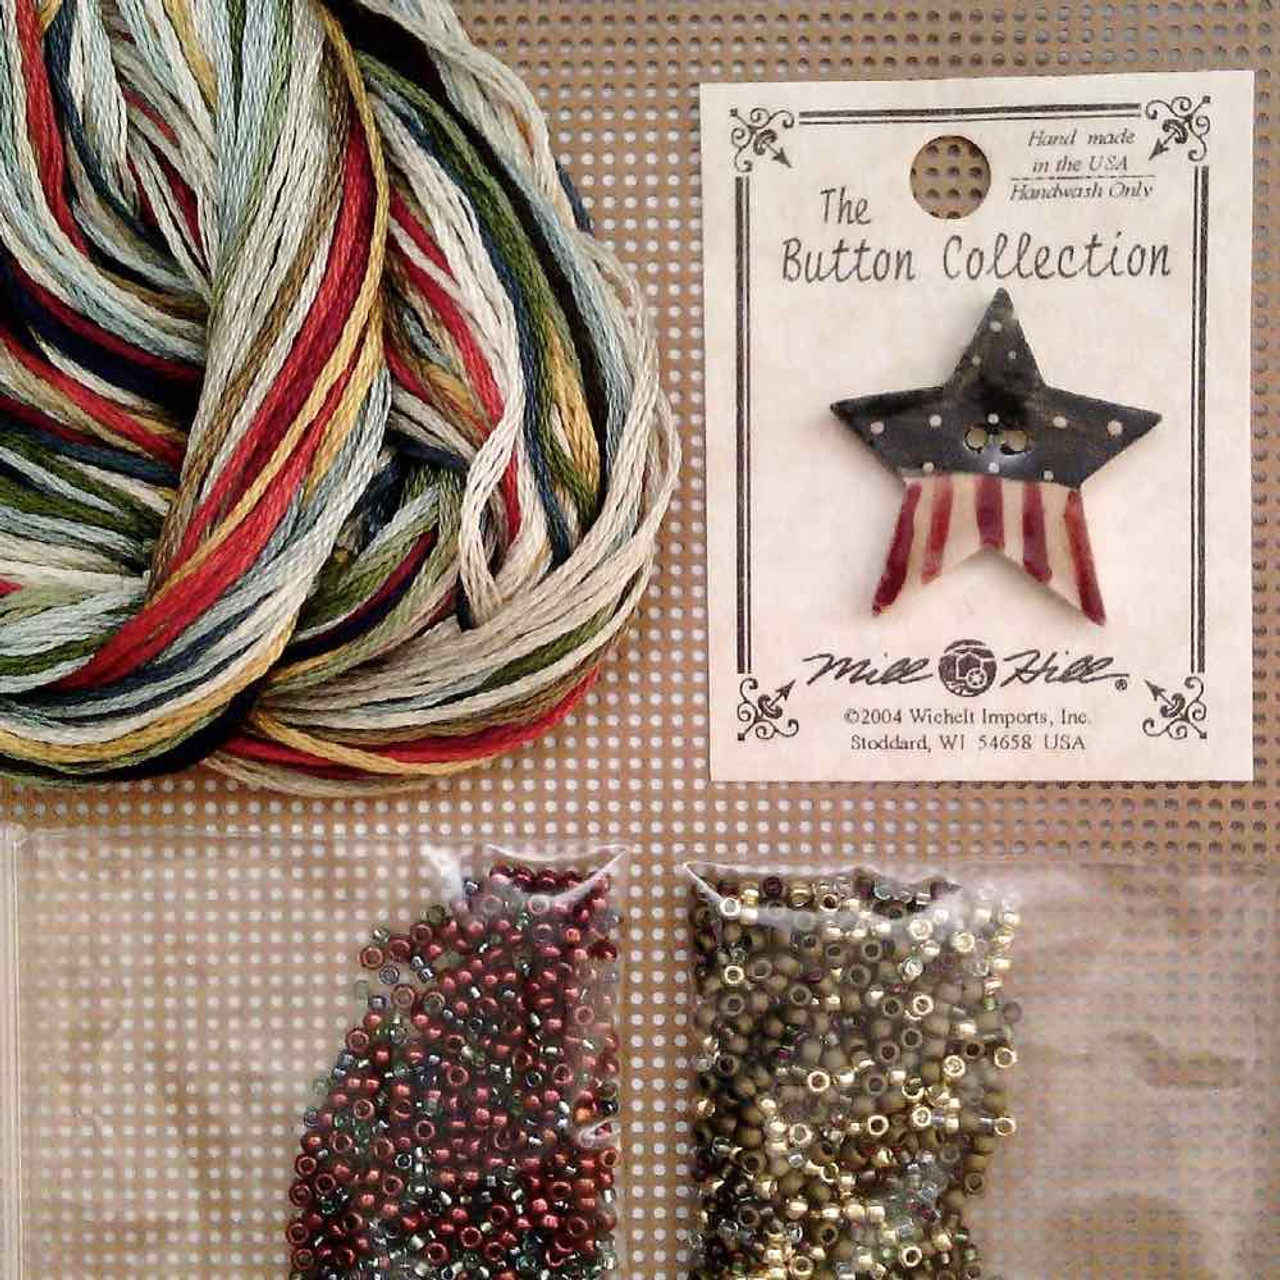 Materials included in Sweet Liberty Cross Stitch Kit Mill Hill 2008 Buttons & Beads Autumn MH148204